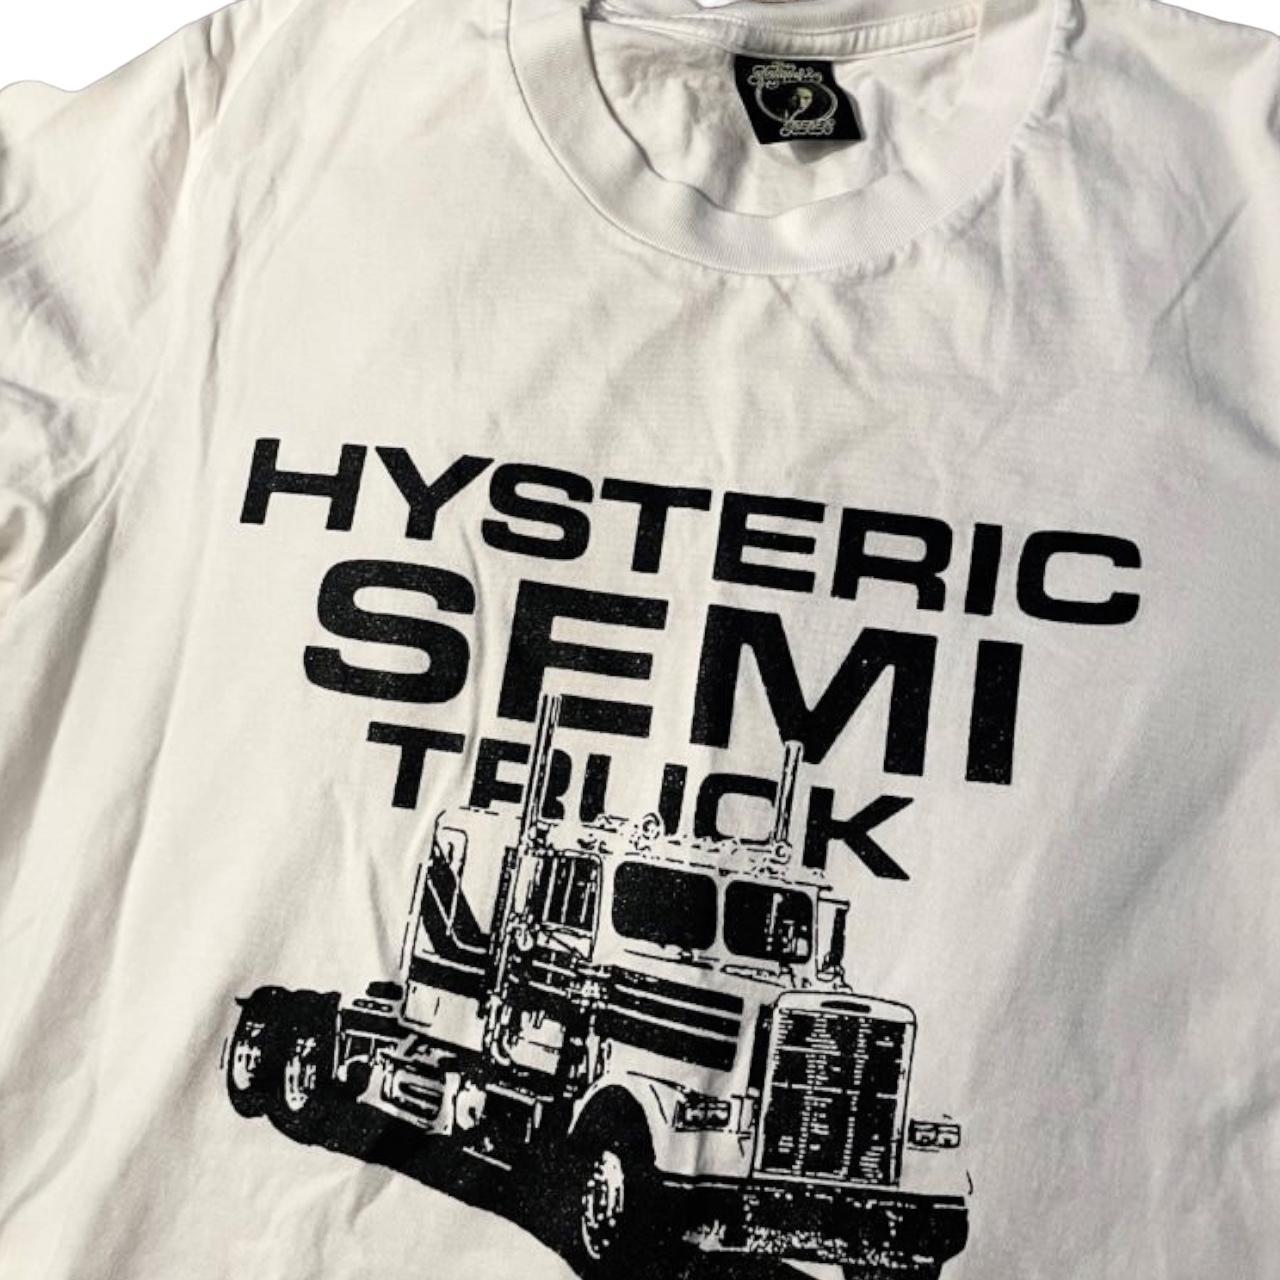 Hysteric Glamour Men's Black and White T-shirt